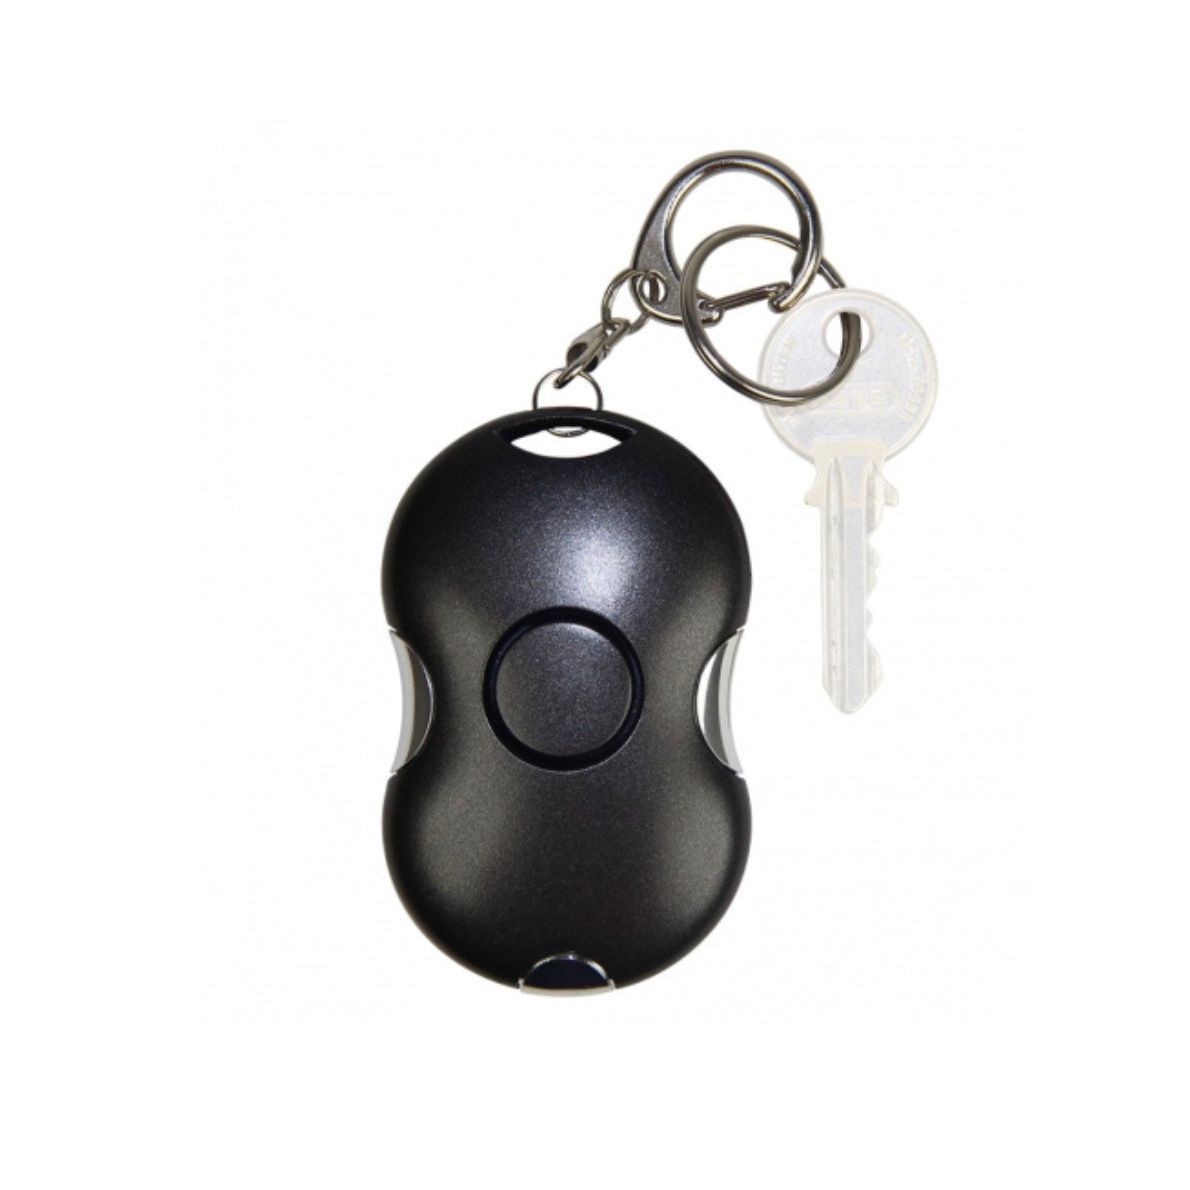 Alarm device with double button 100 dB for handbags or bunch of keys